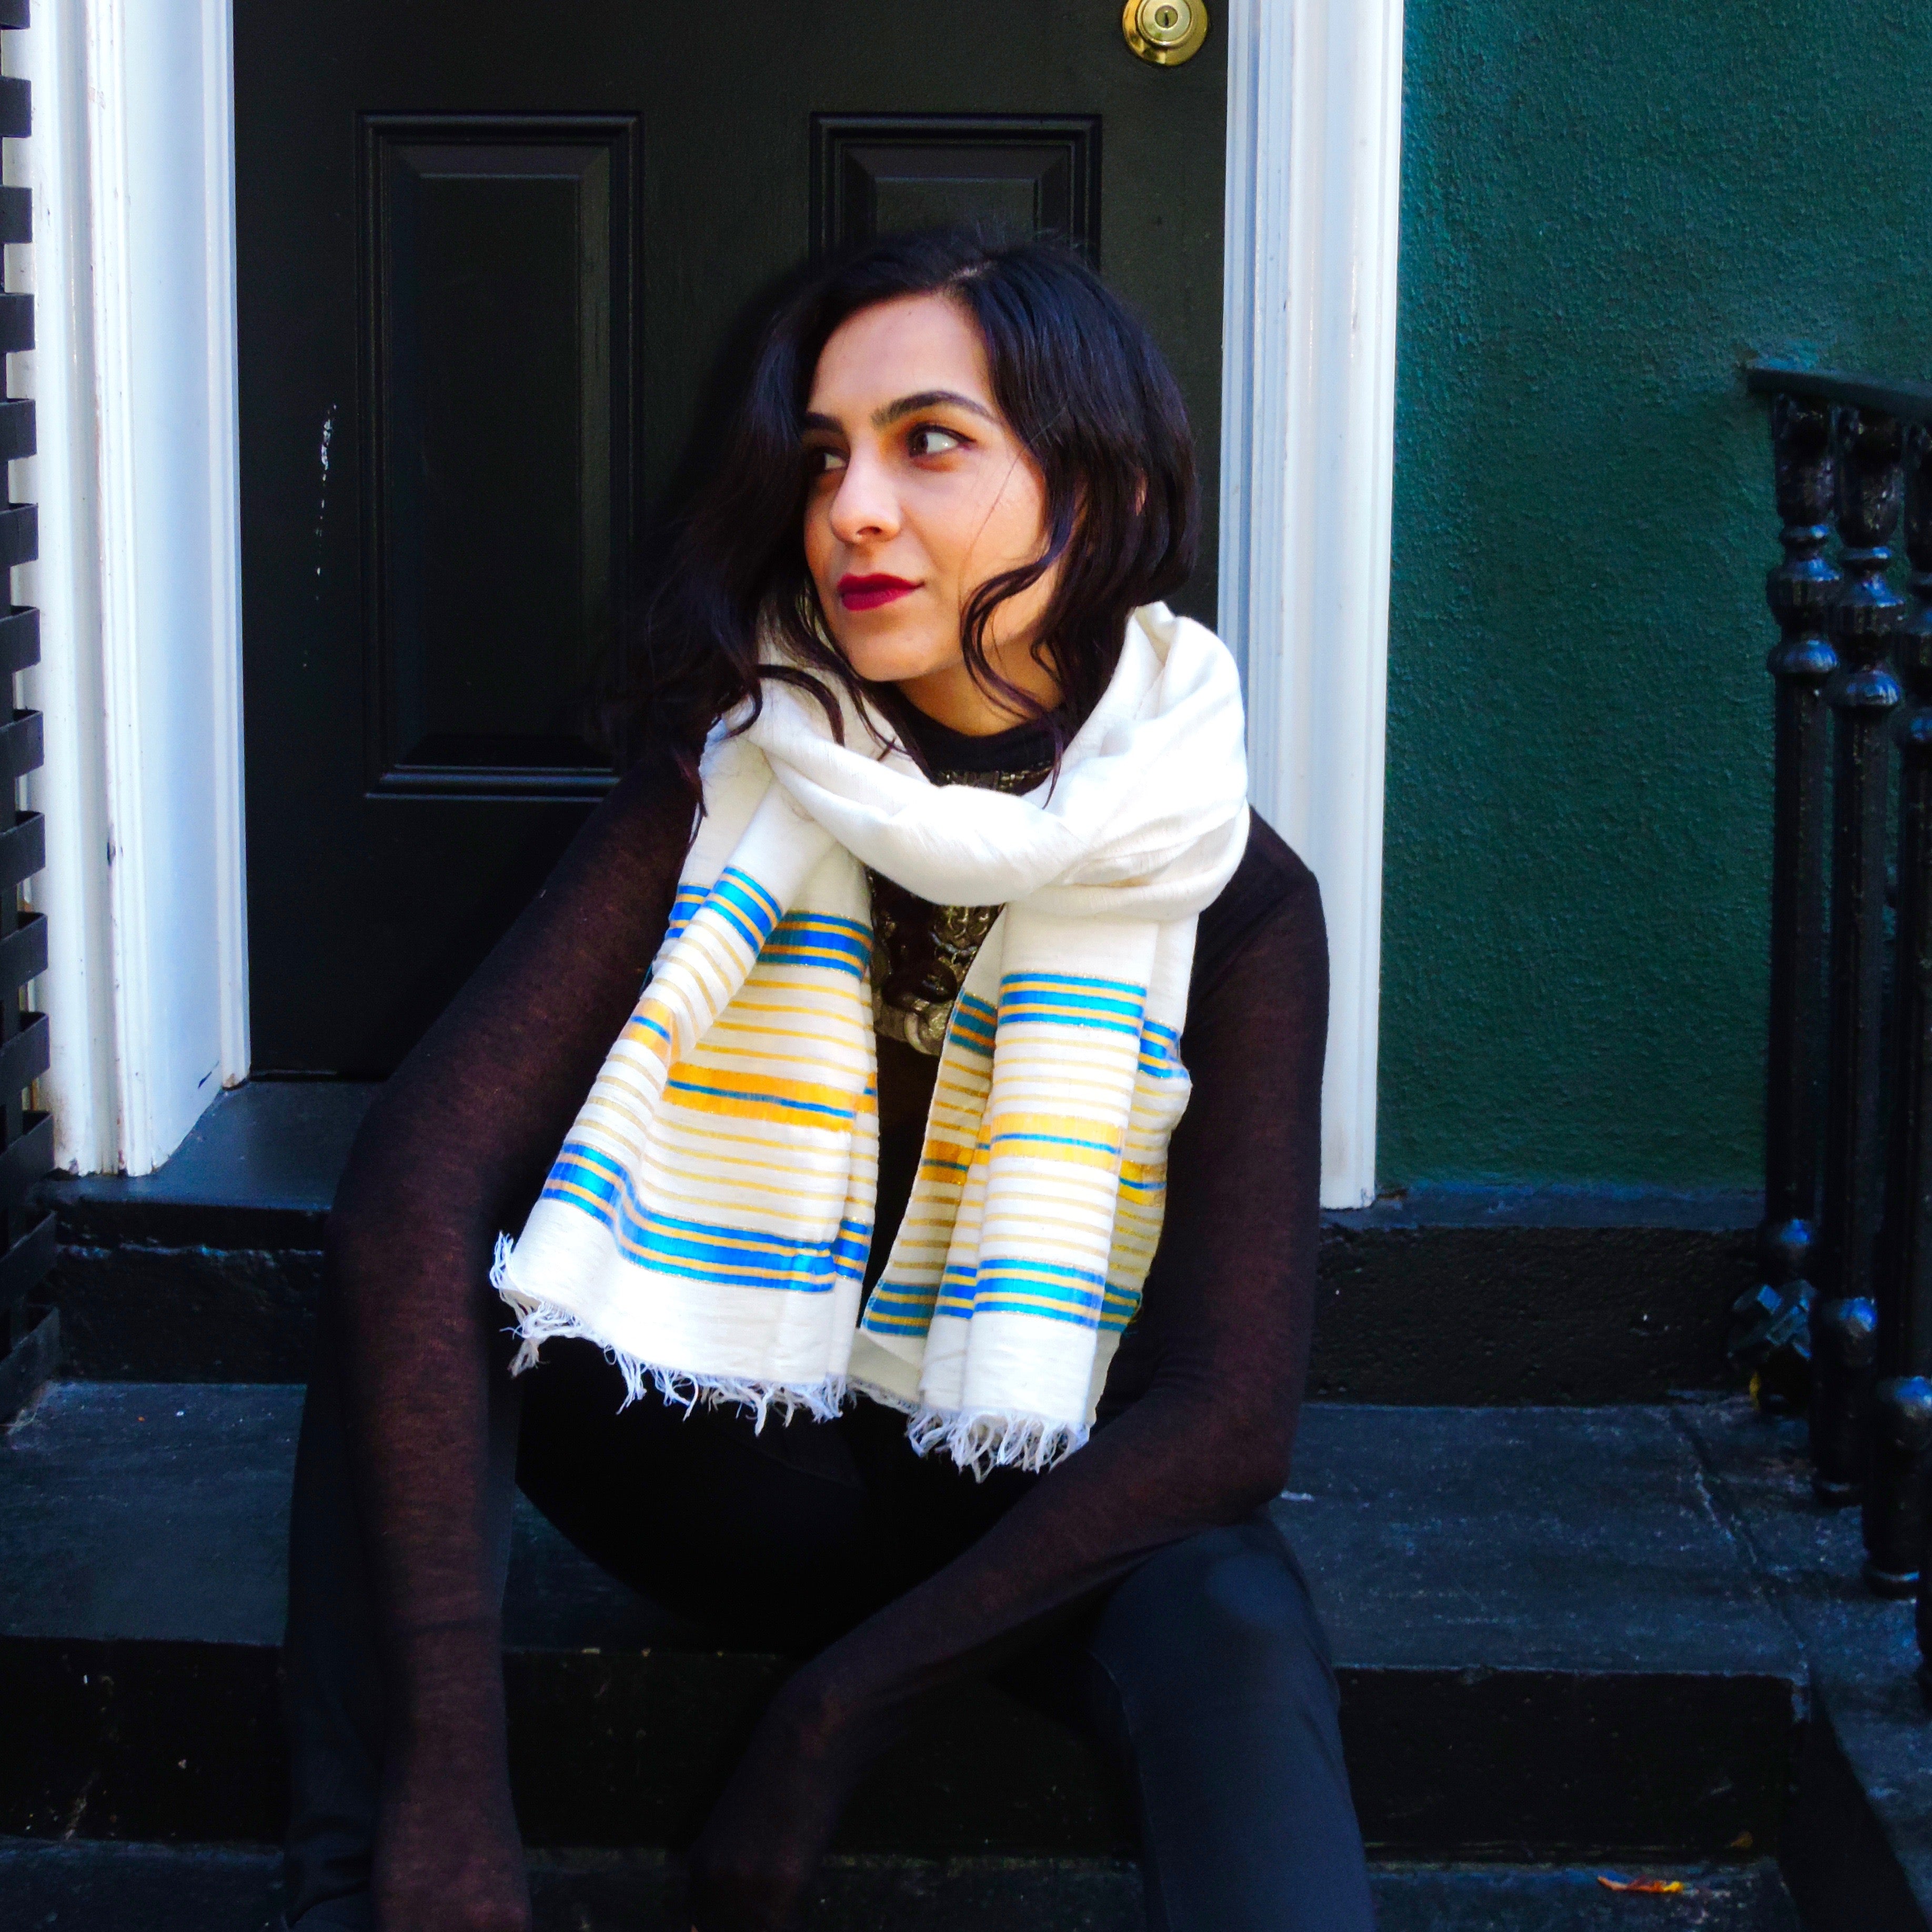 Ethiopian Hand Woven Cotton Scarves In 6 Colors